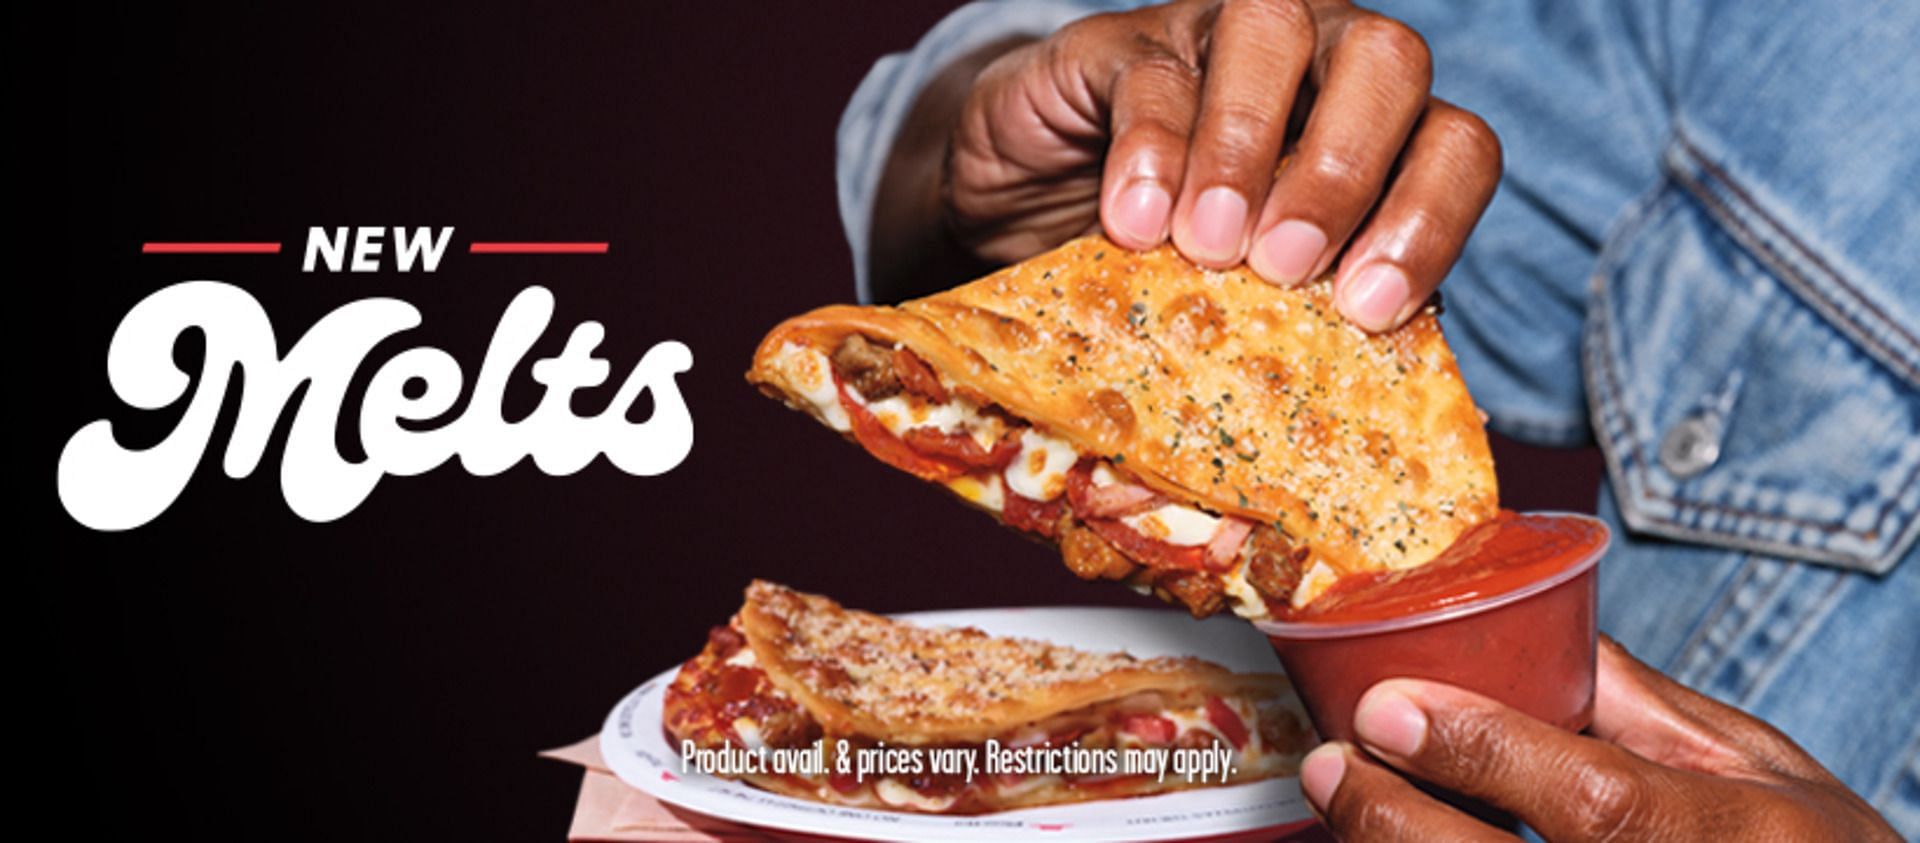 Promotional material for Melts, (Image via Twitter/@pizzahut)